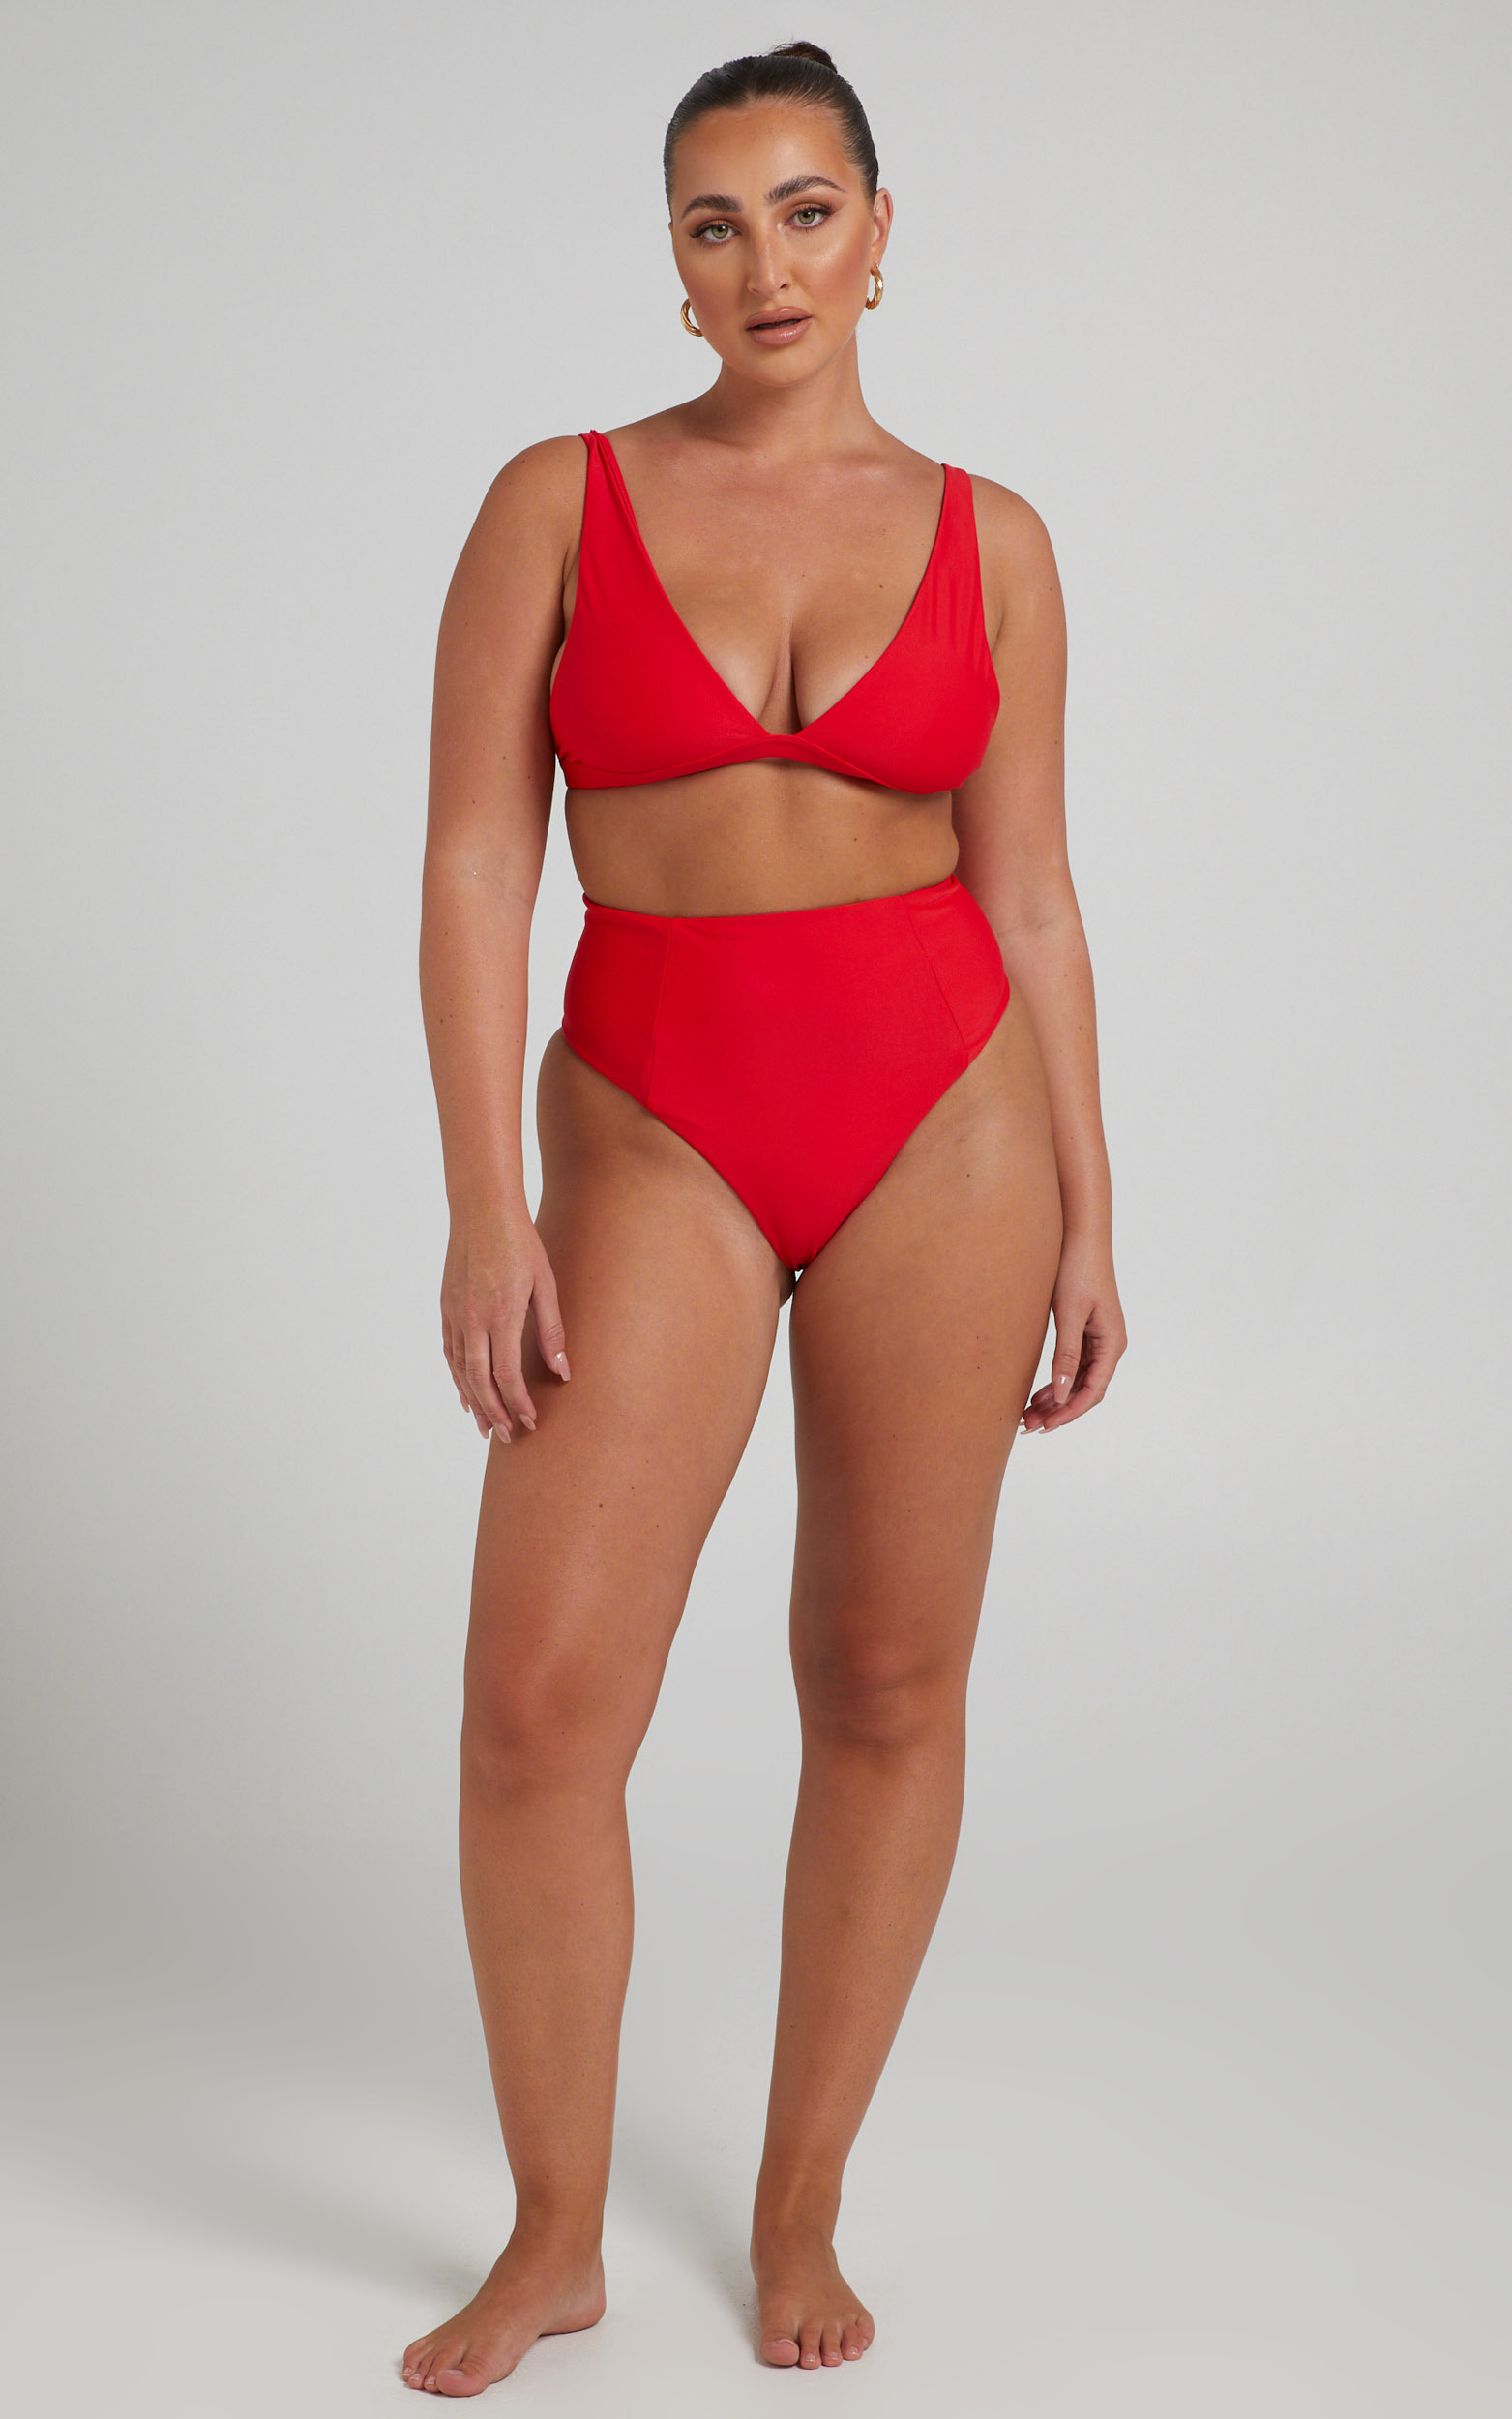 Coventina Triangle Bikini Top s in Recycled Nylon in Red - 04, RED2, hi-res image number null